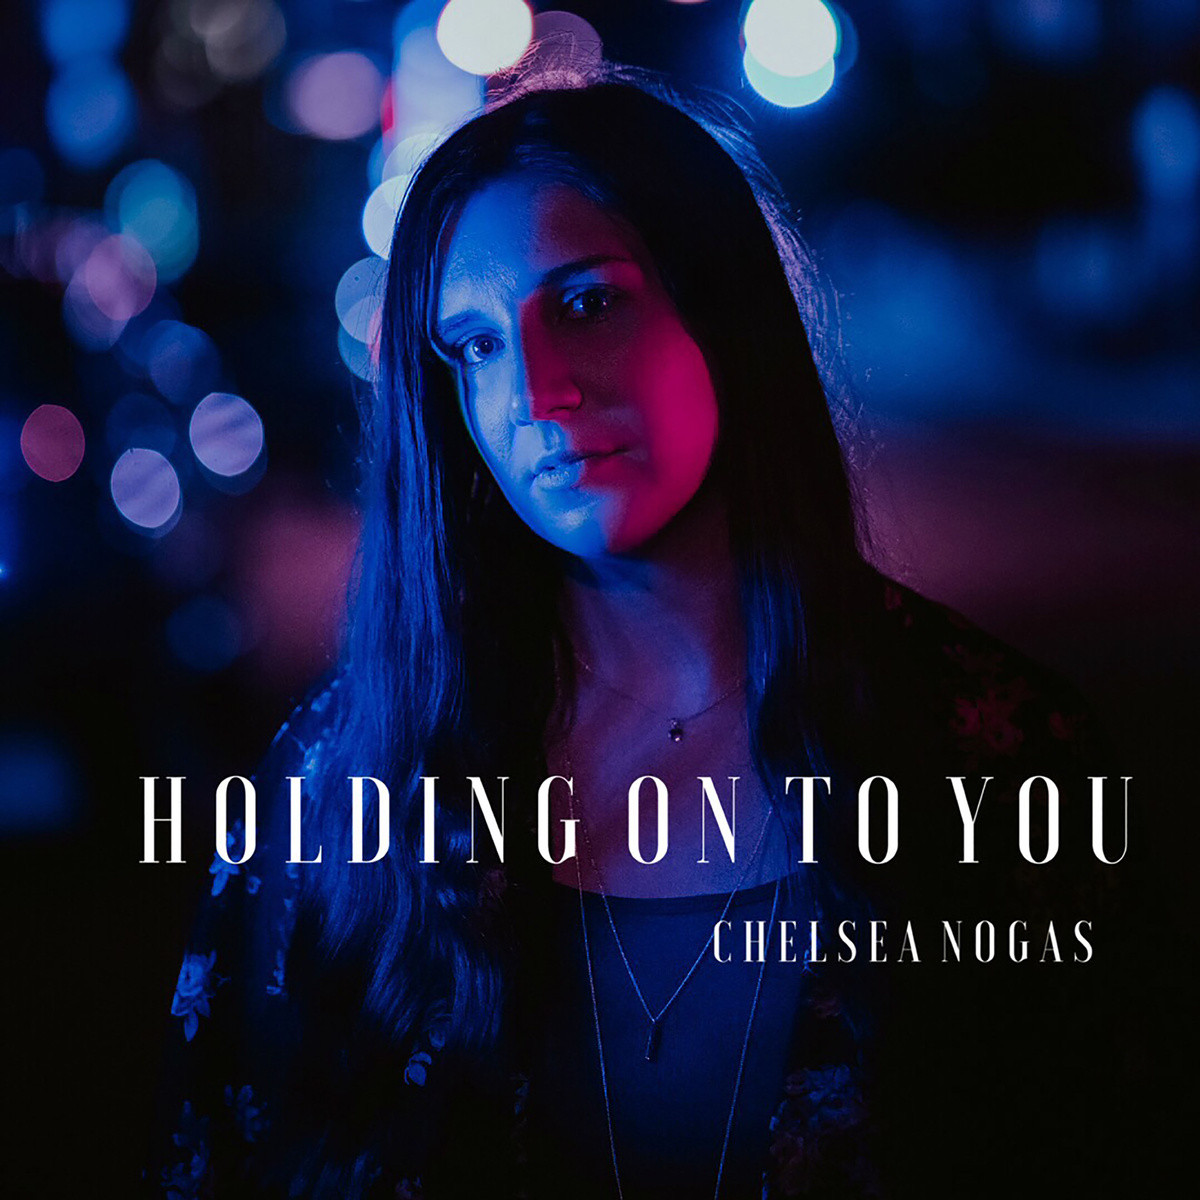 Chelsea Nogas Releasing New Single 'Holding on to You'